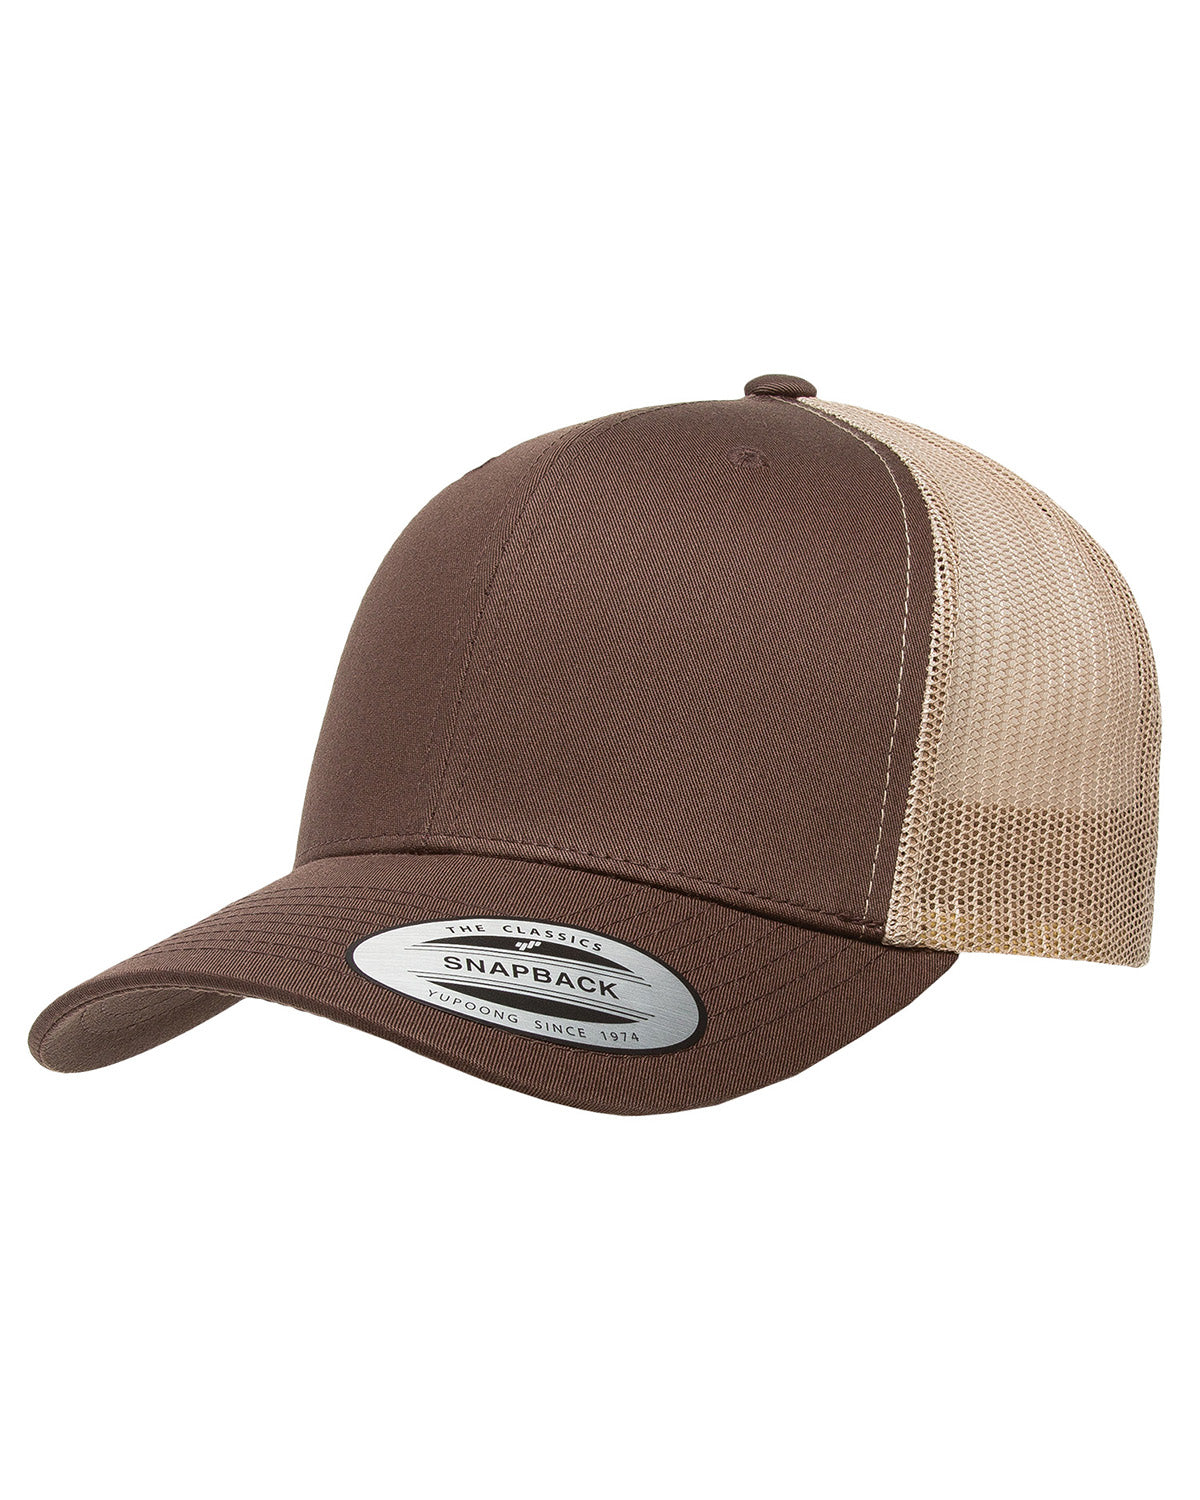 Design Custom Embroidered Hats Online With Your Logo